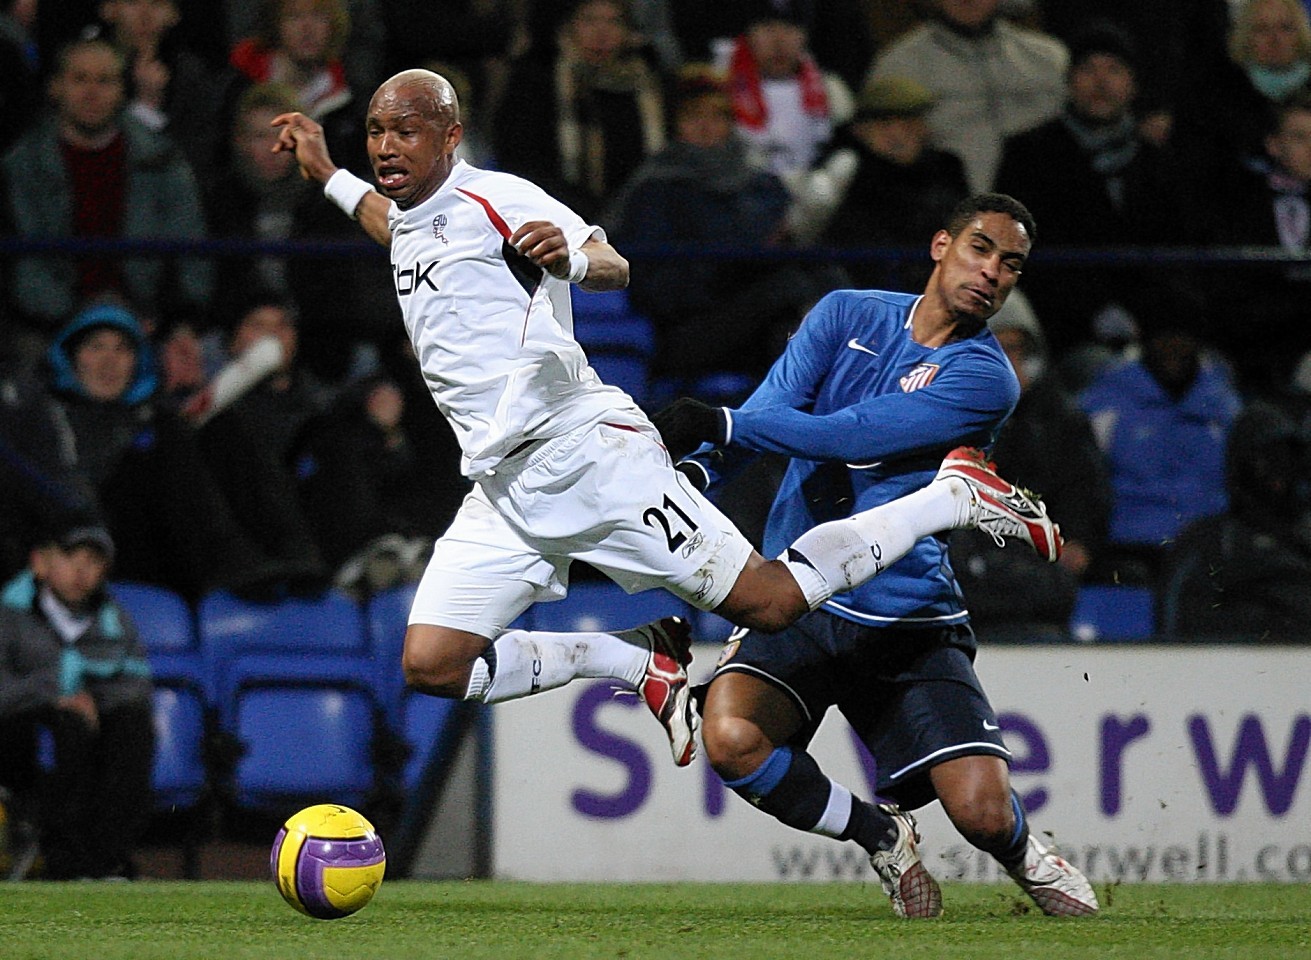 Senegalese striker El-Hadji Diouf (pictured playing for Bolton) famously won a penalty in the 2002 World Cup against Uruguay, despite video replays showing no contact